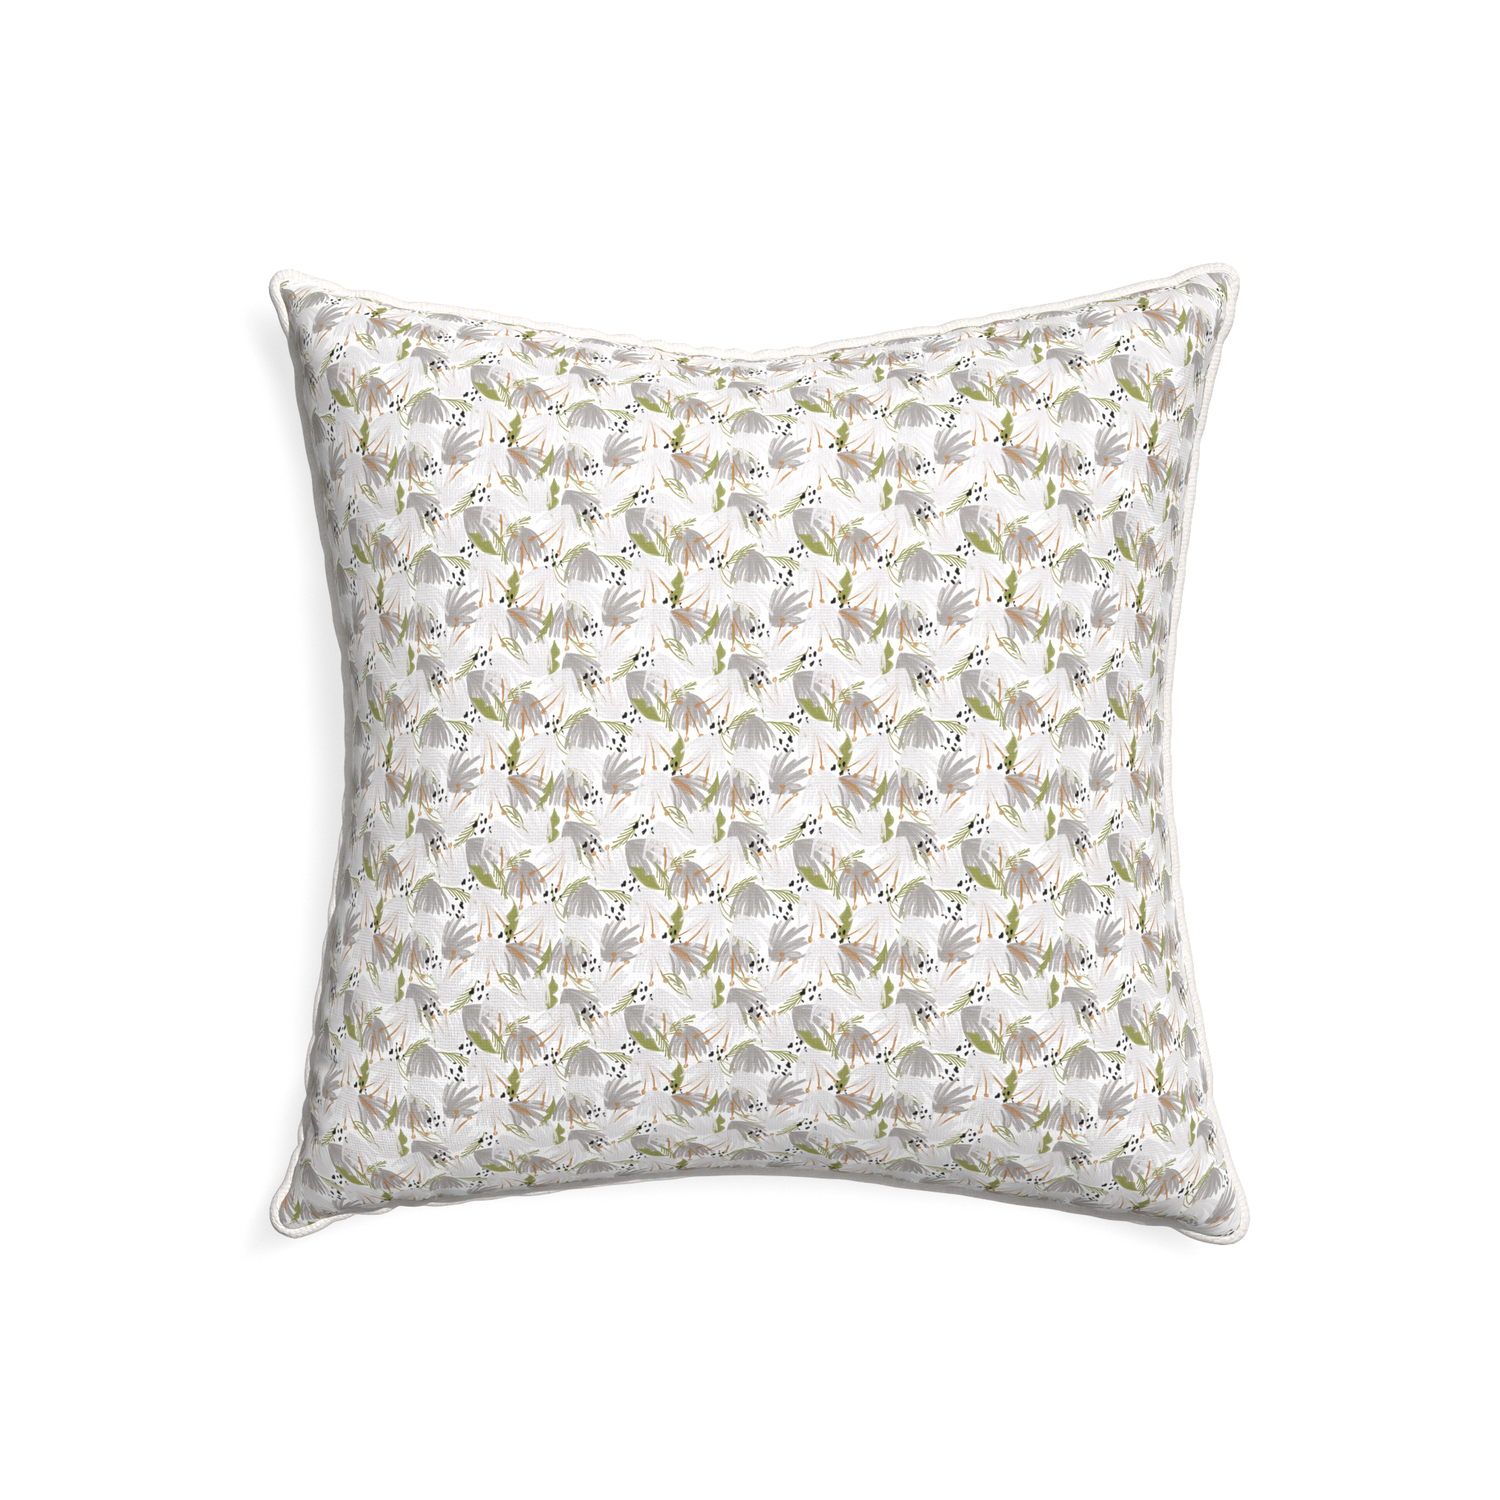 22-square eden grey custom pillow with snow piping on white background